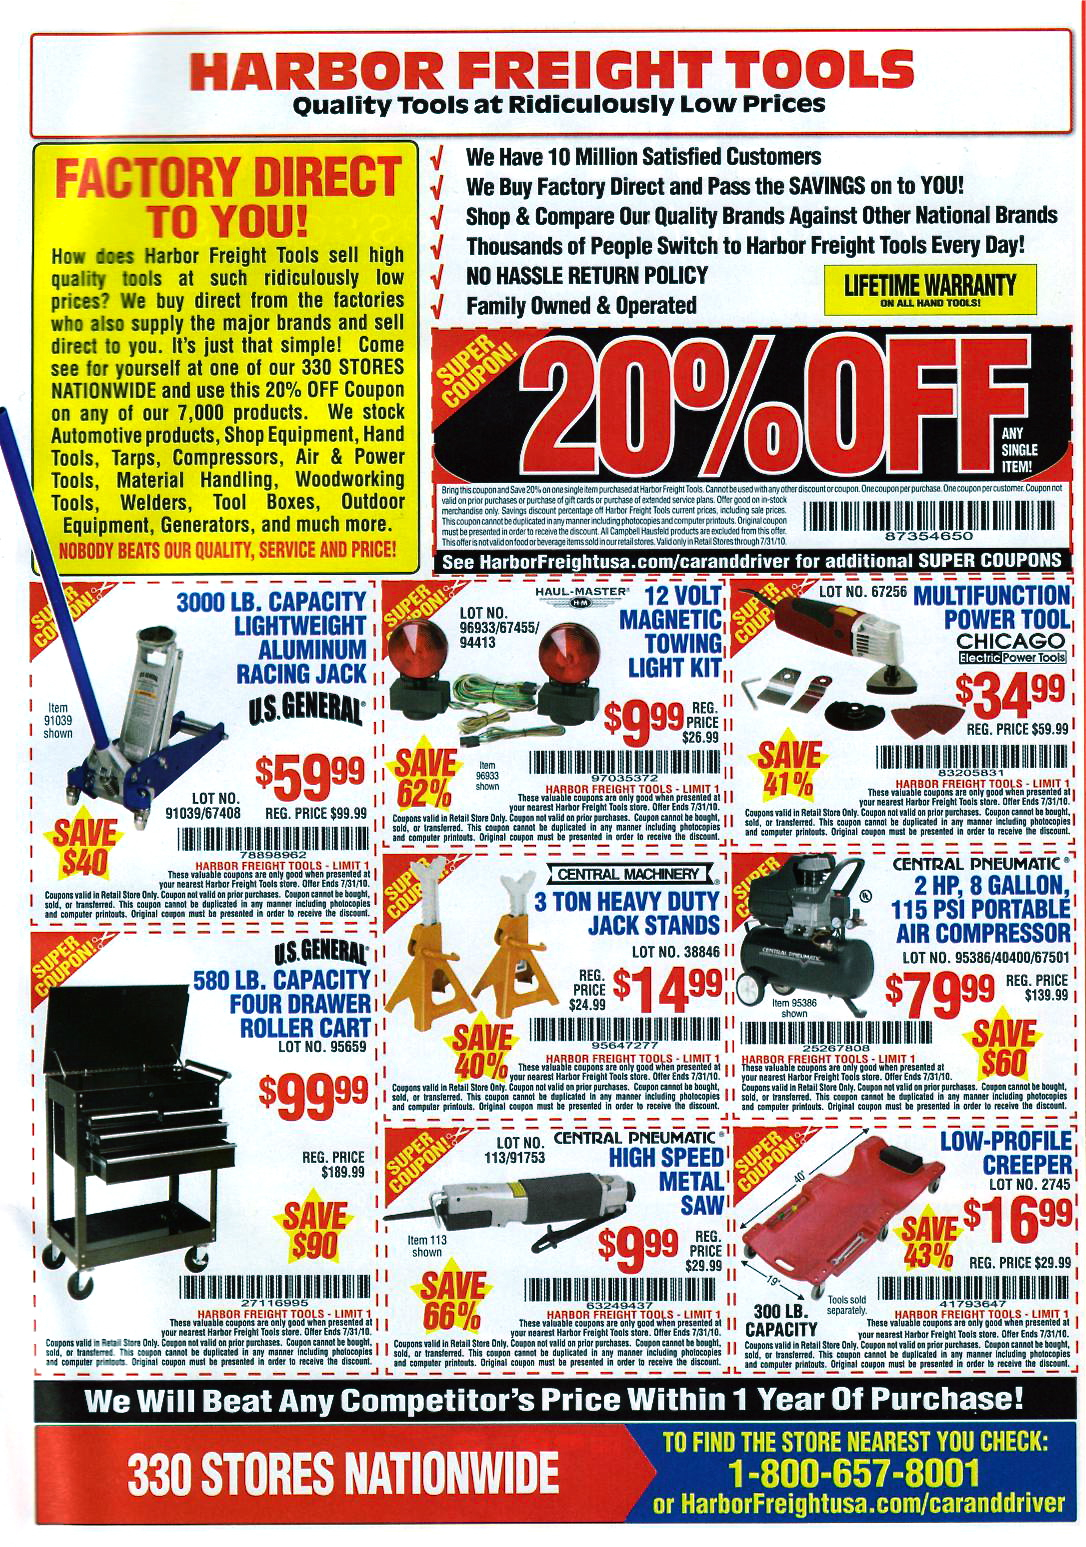 Harbor Freight Coupon Deals from Car and Driver Magazine — DO IT